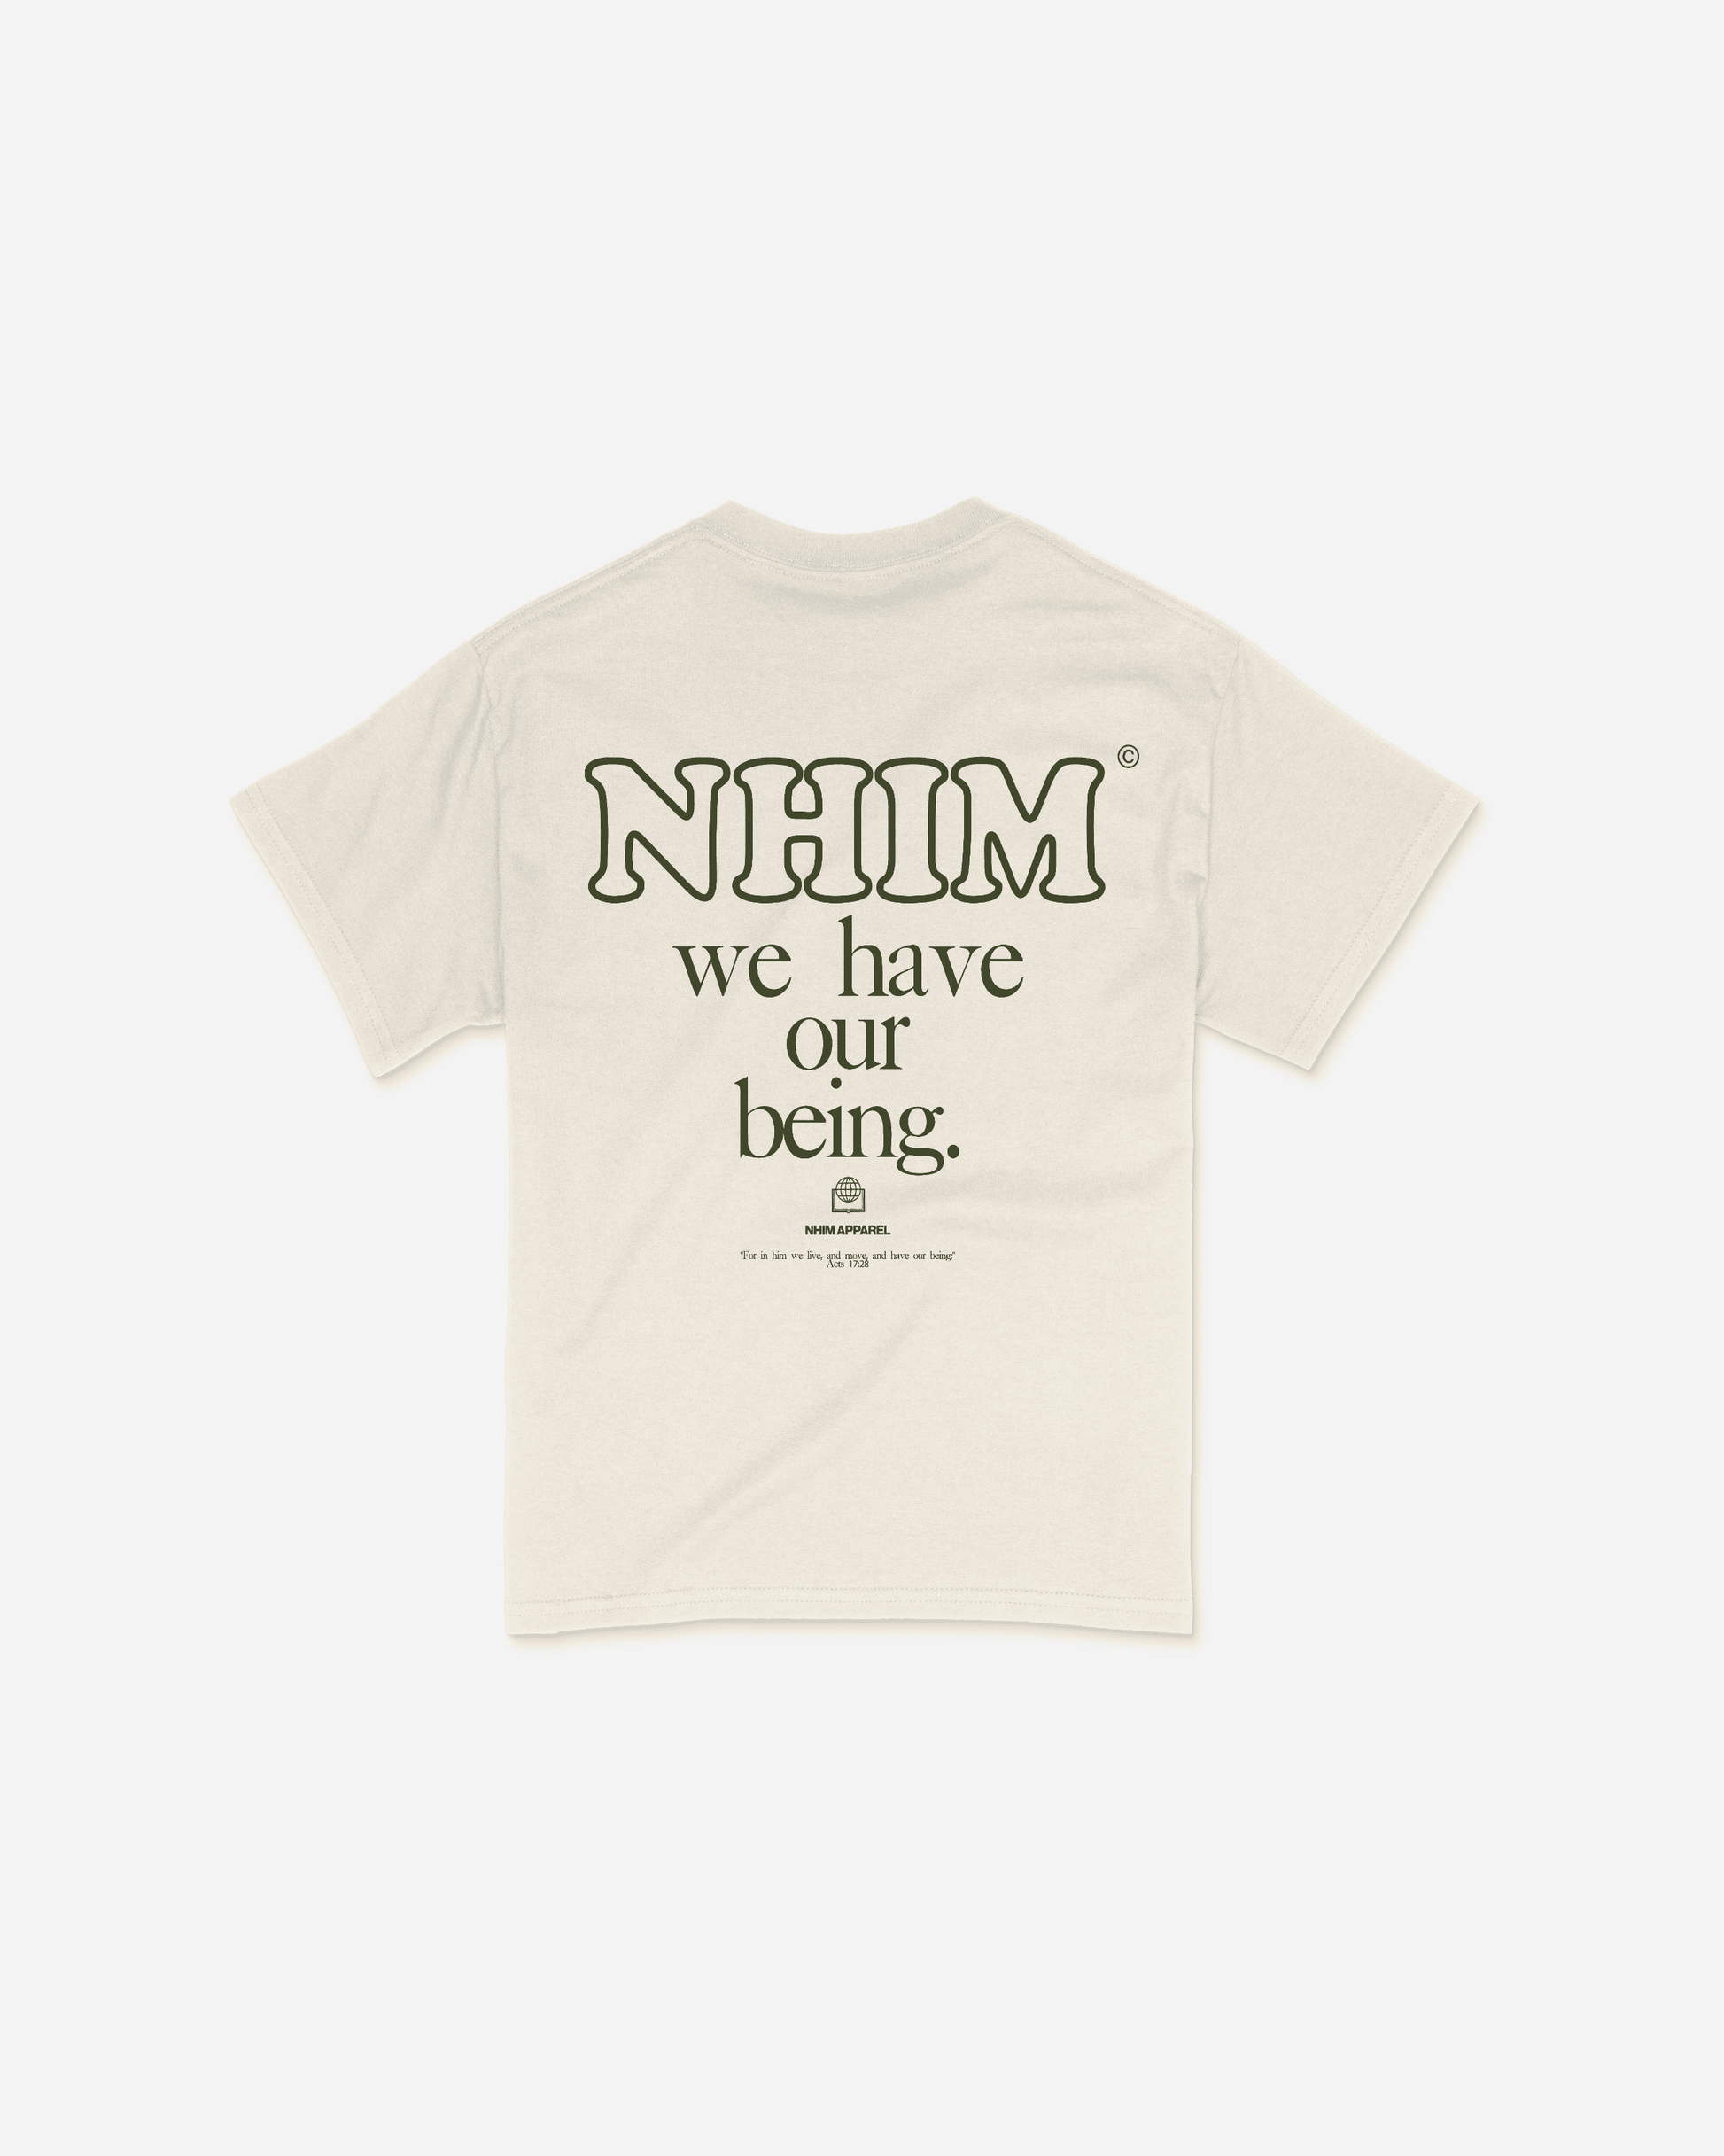 NHIM We have our being natural shirt by NHIM apparel christian clothing brand The name "NHIM" comes from Acts 17:28: “For in Him we live and move and have our being". A collection inspired by our beginnings. Made in the USA